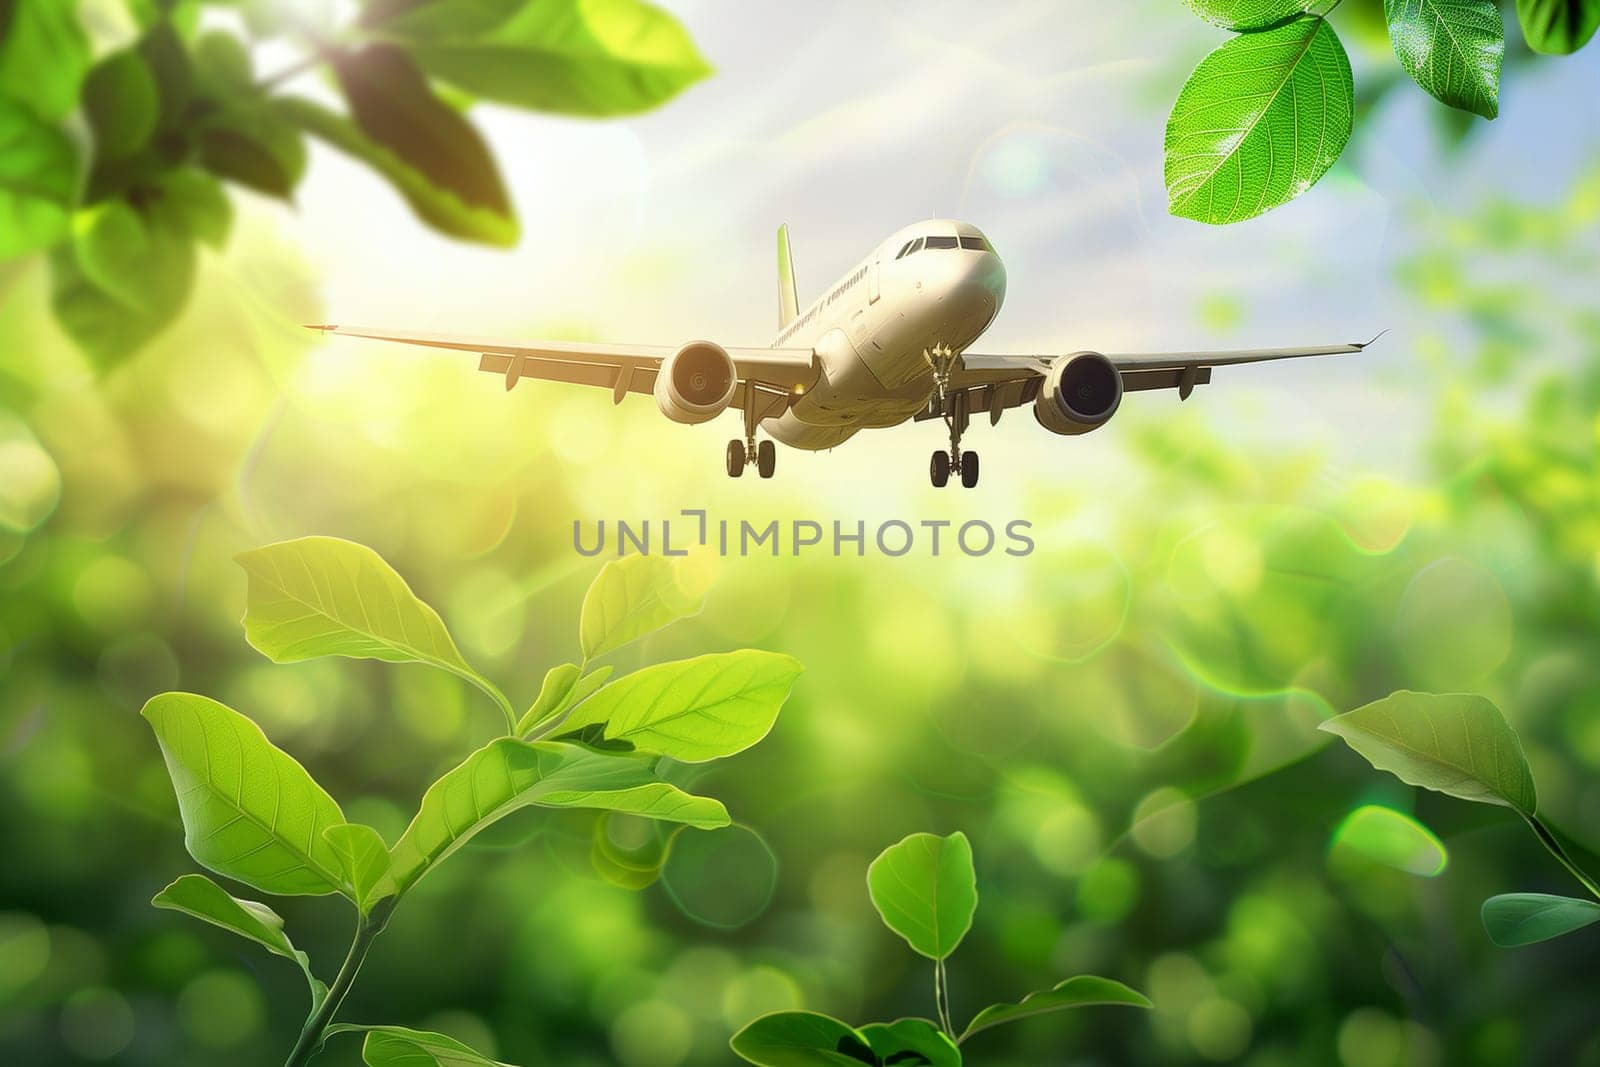 Airplane Flying Over Lush Green Field by Sd28DimoN_1976